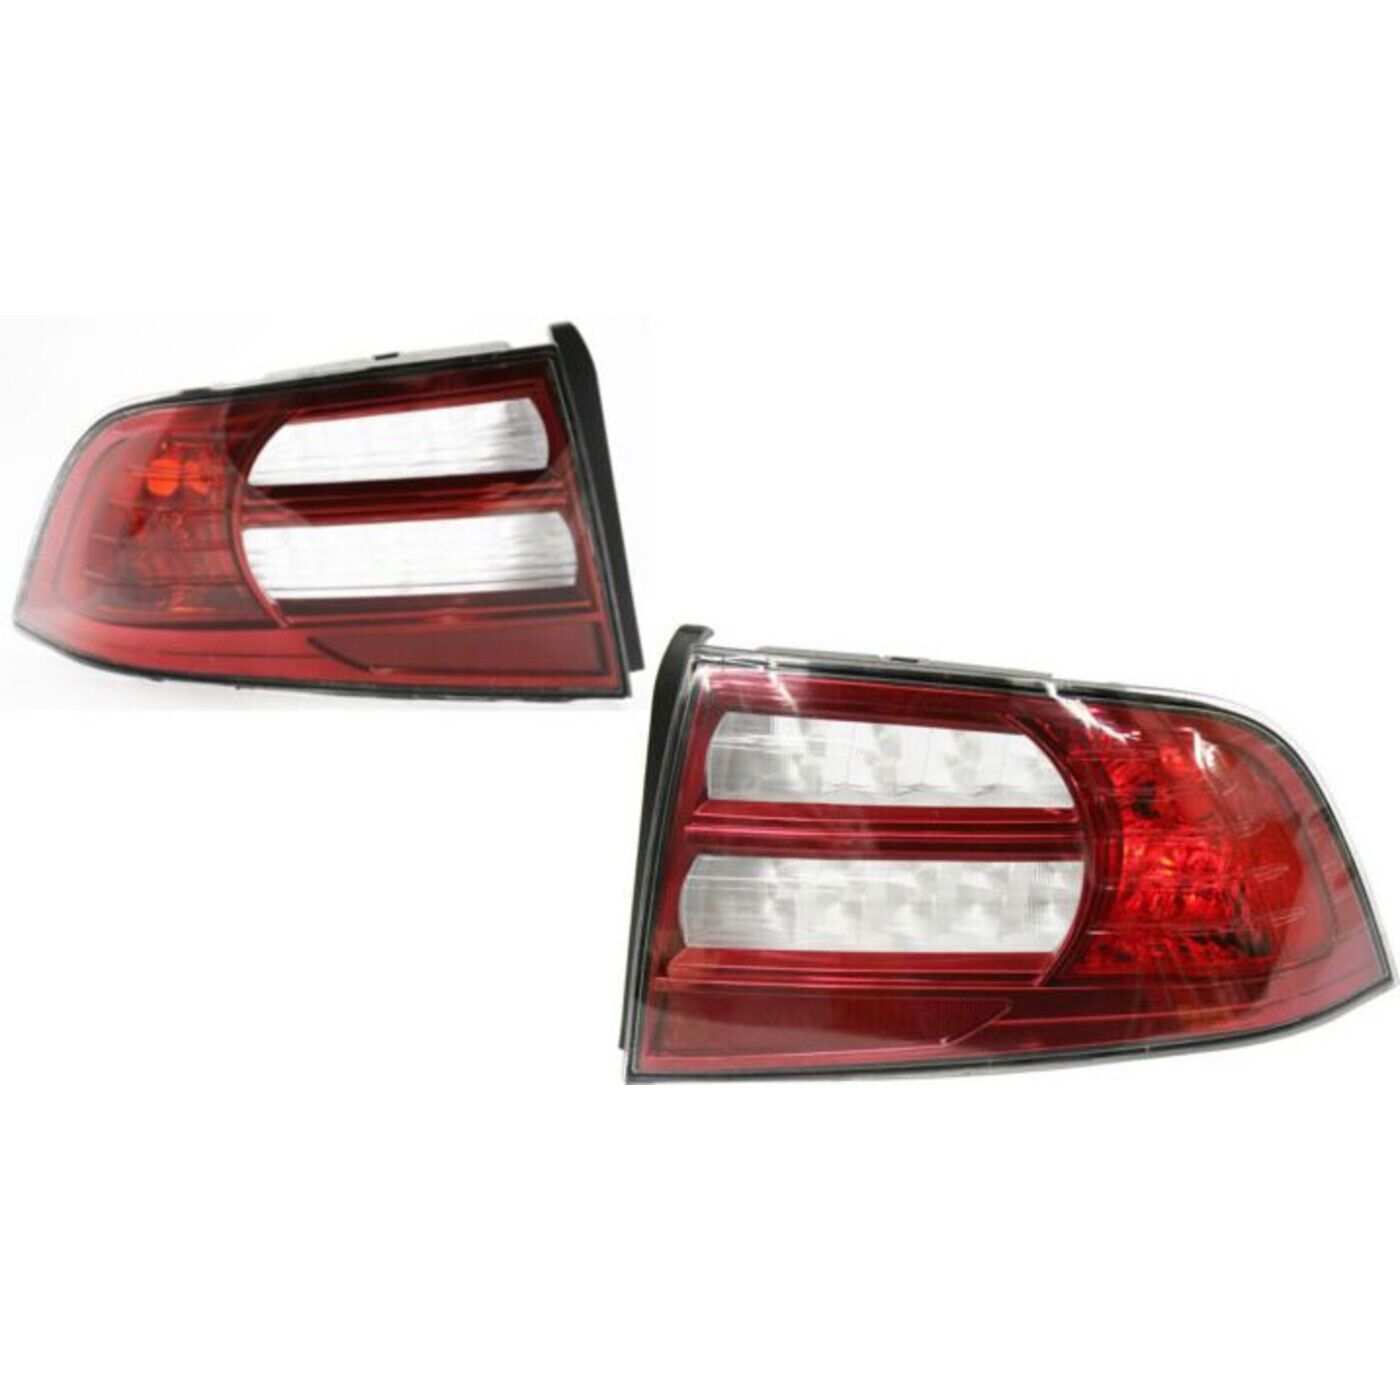 Halogen Tail Light Set For 2007-2008 Acura TL Clear & Red Lens 2Pcs